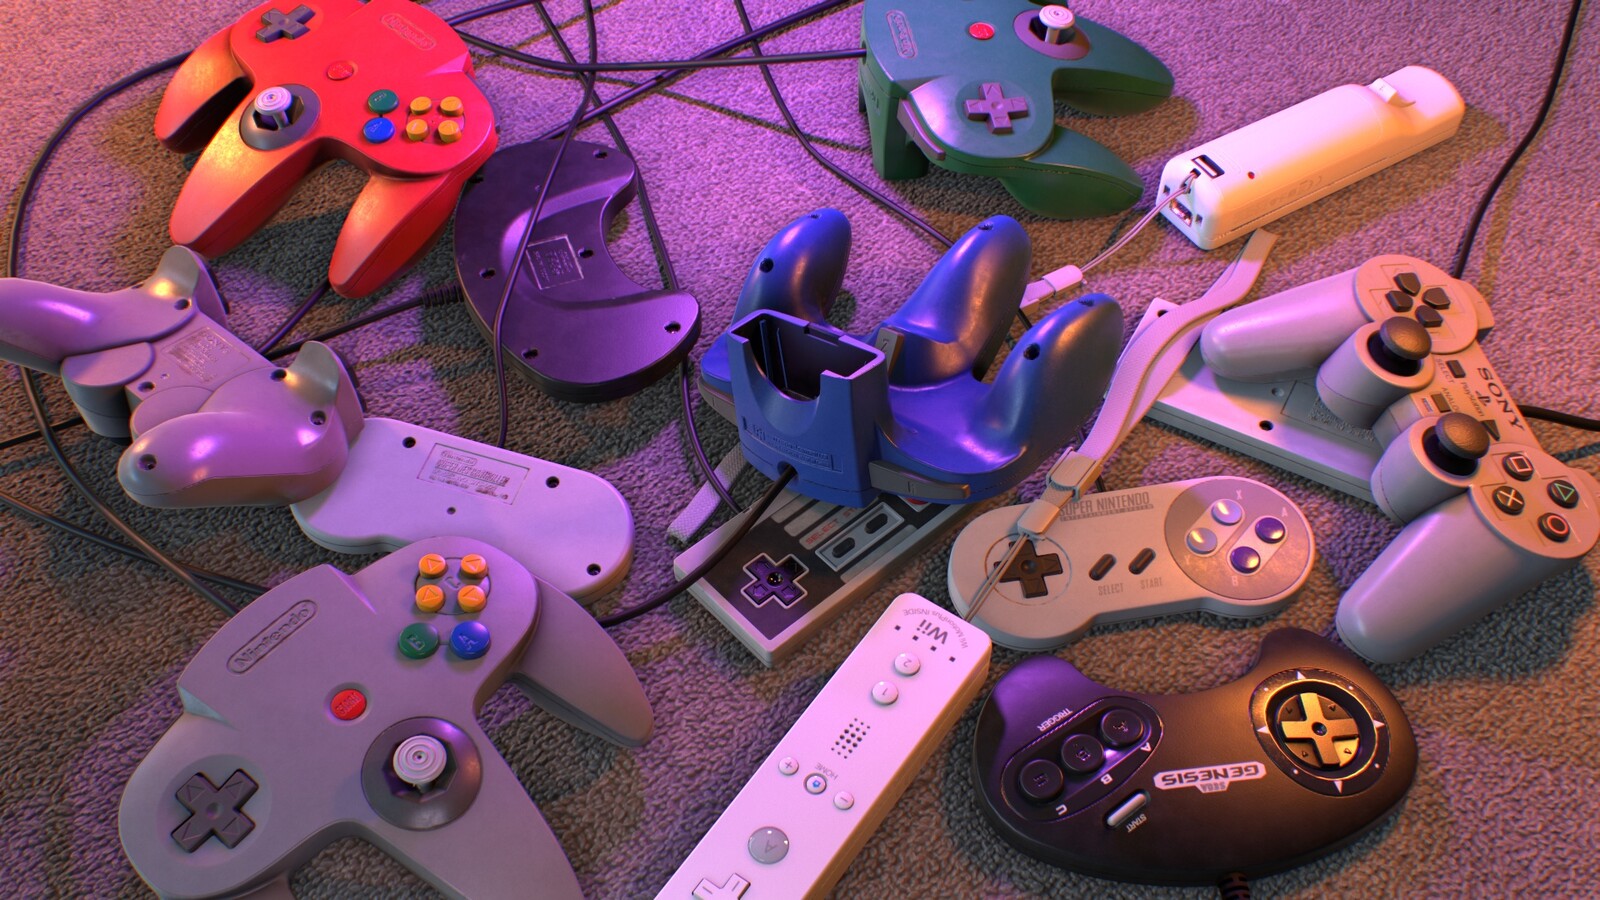 Controllers of happiness